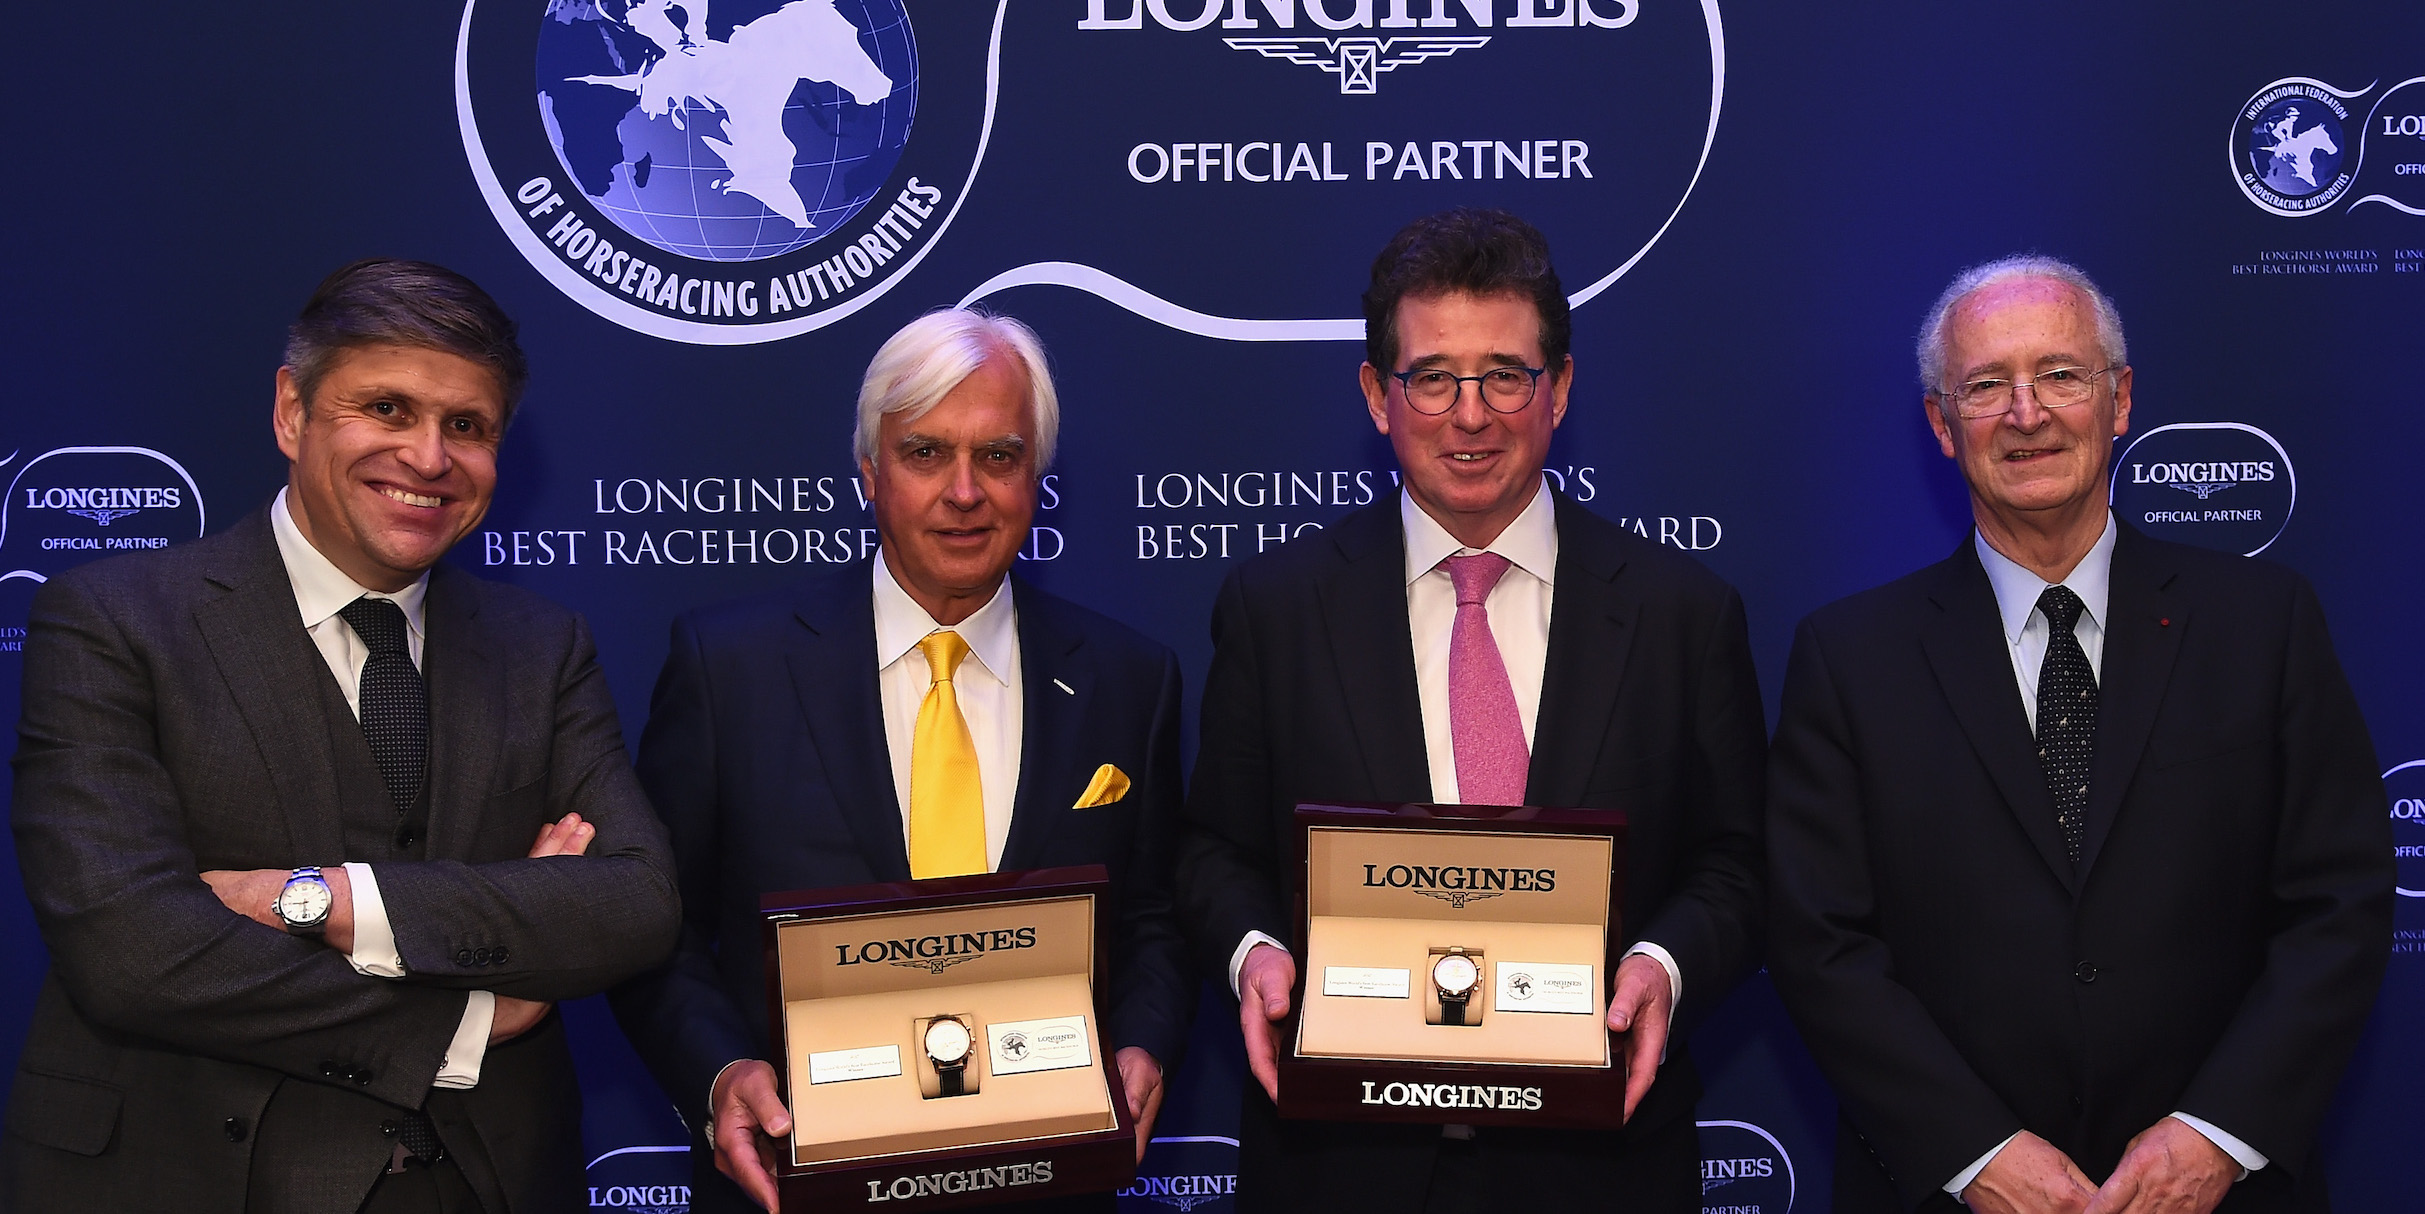 Arrogate’s trainer, Bob Baffert (second left), and Lord Grimthorpe (third left), owner Prince Khalid Abdullah’s racing manager, at the London presentation with Longines vice president Juan-Carlos Capelli (left) and IFHA chairman Louis Romanet. Photo: Longines